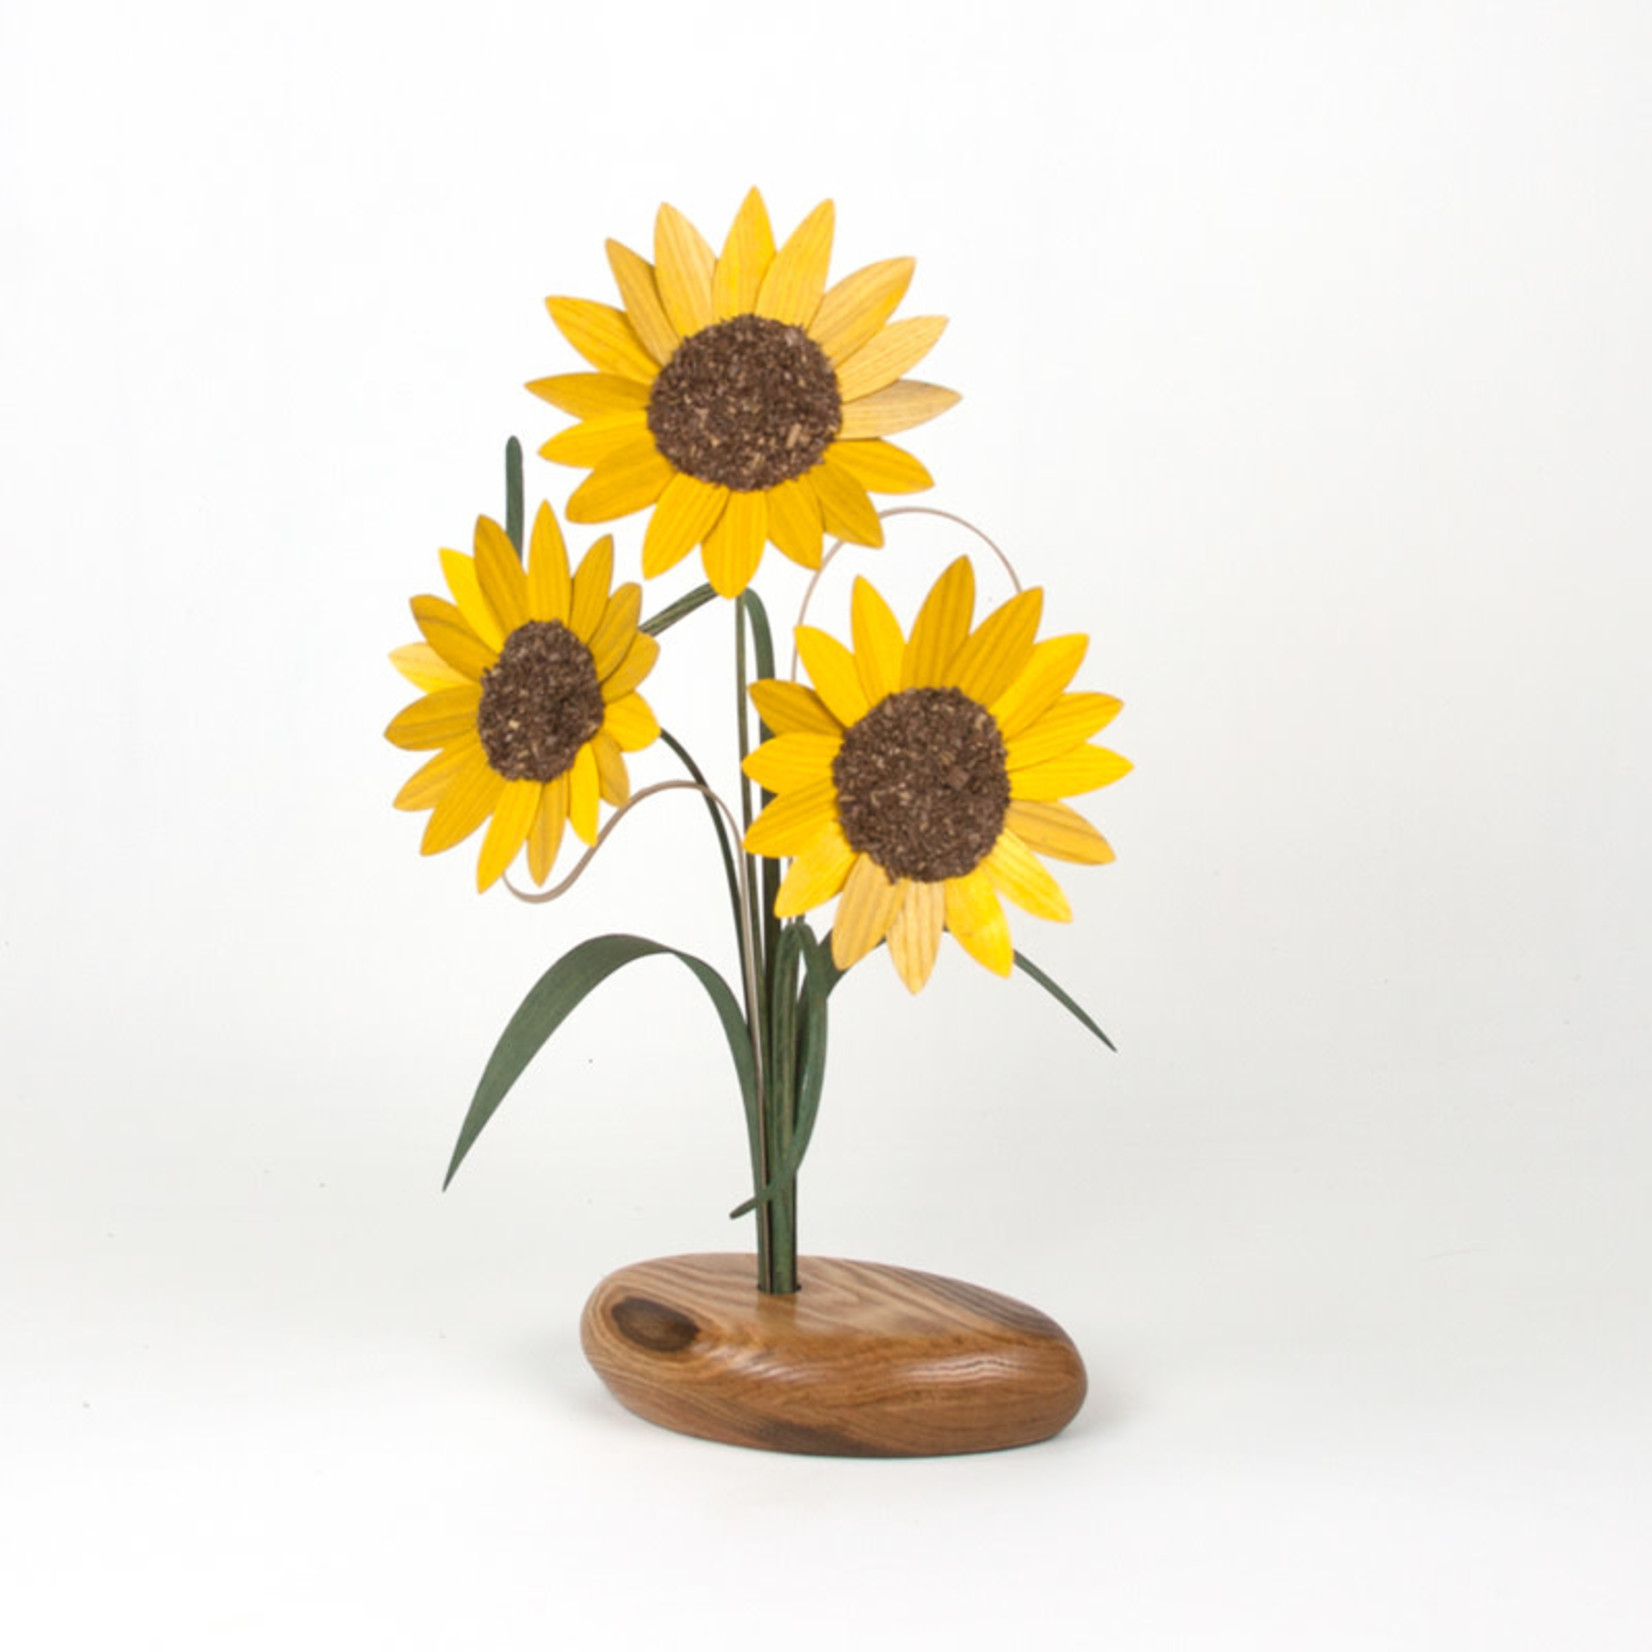 NATURE'S GIFT SERIES - WOOD VASE WITH WOOD SUNFLOWERS